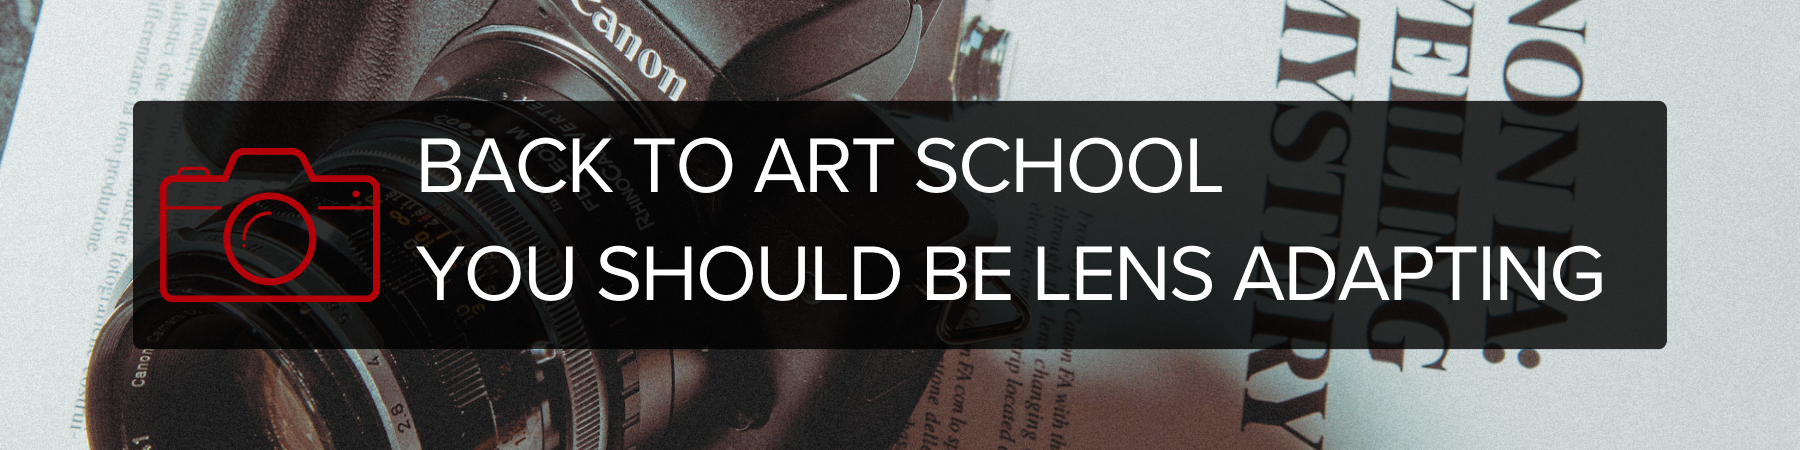 Back to Art School: You Should Be Lens Adapting